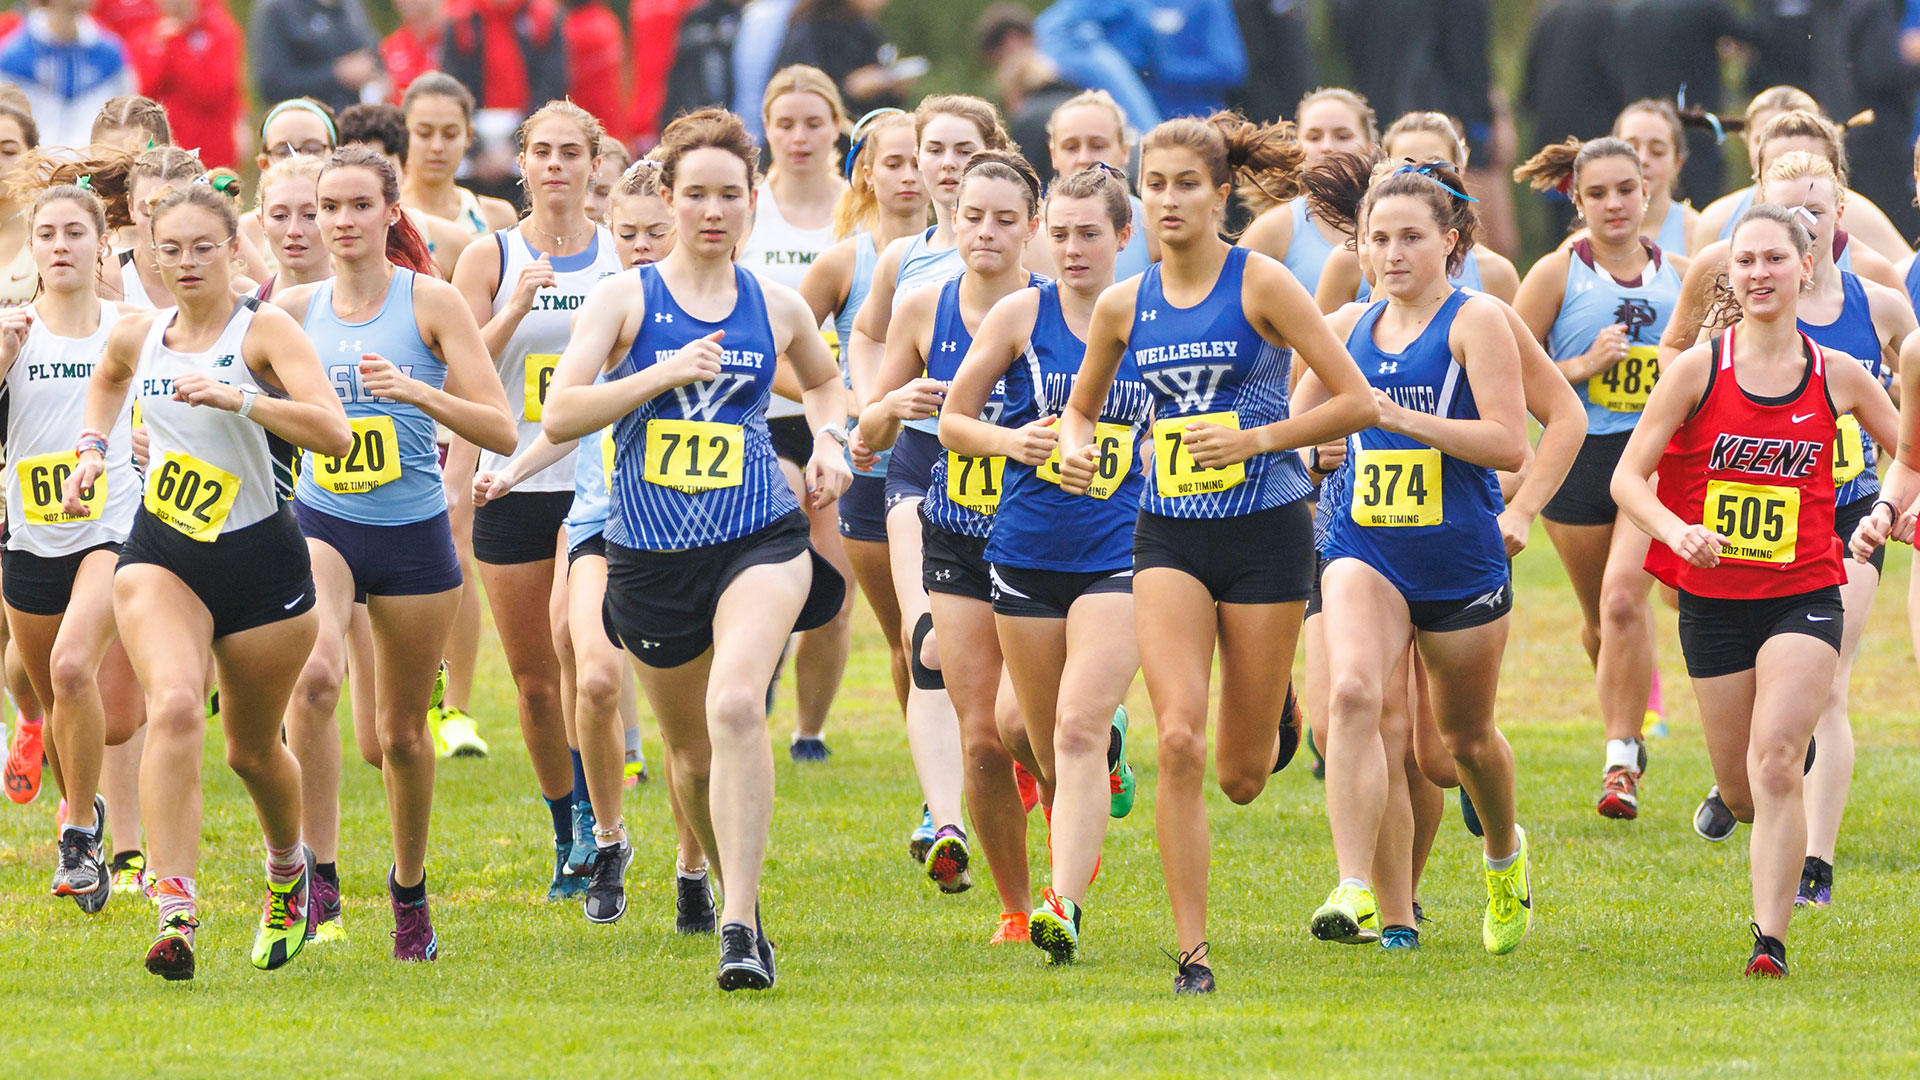 Wellesley cross country races at 12:00 PM on Saturday in the NEWMAC Championships (Frank Poulin)